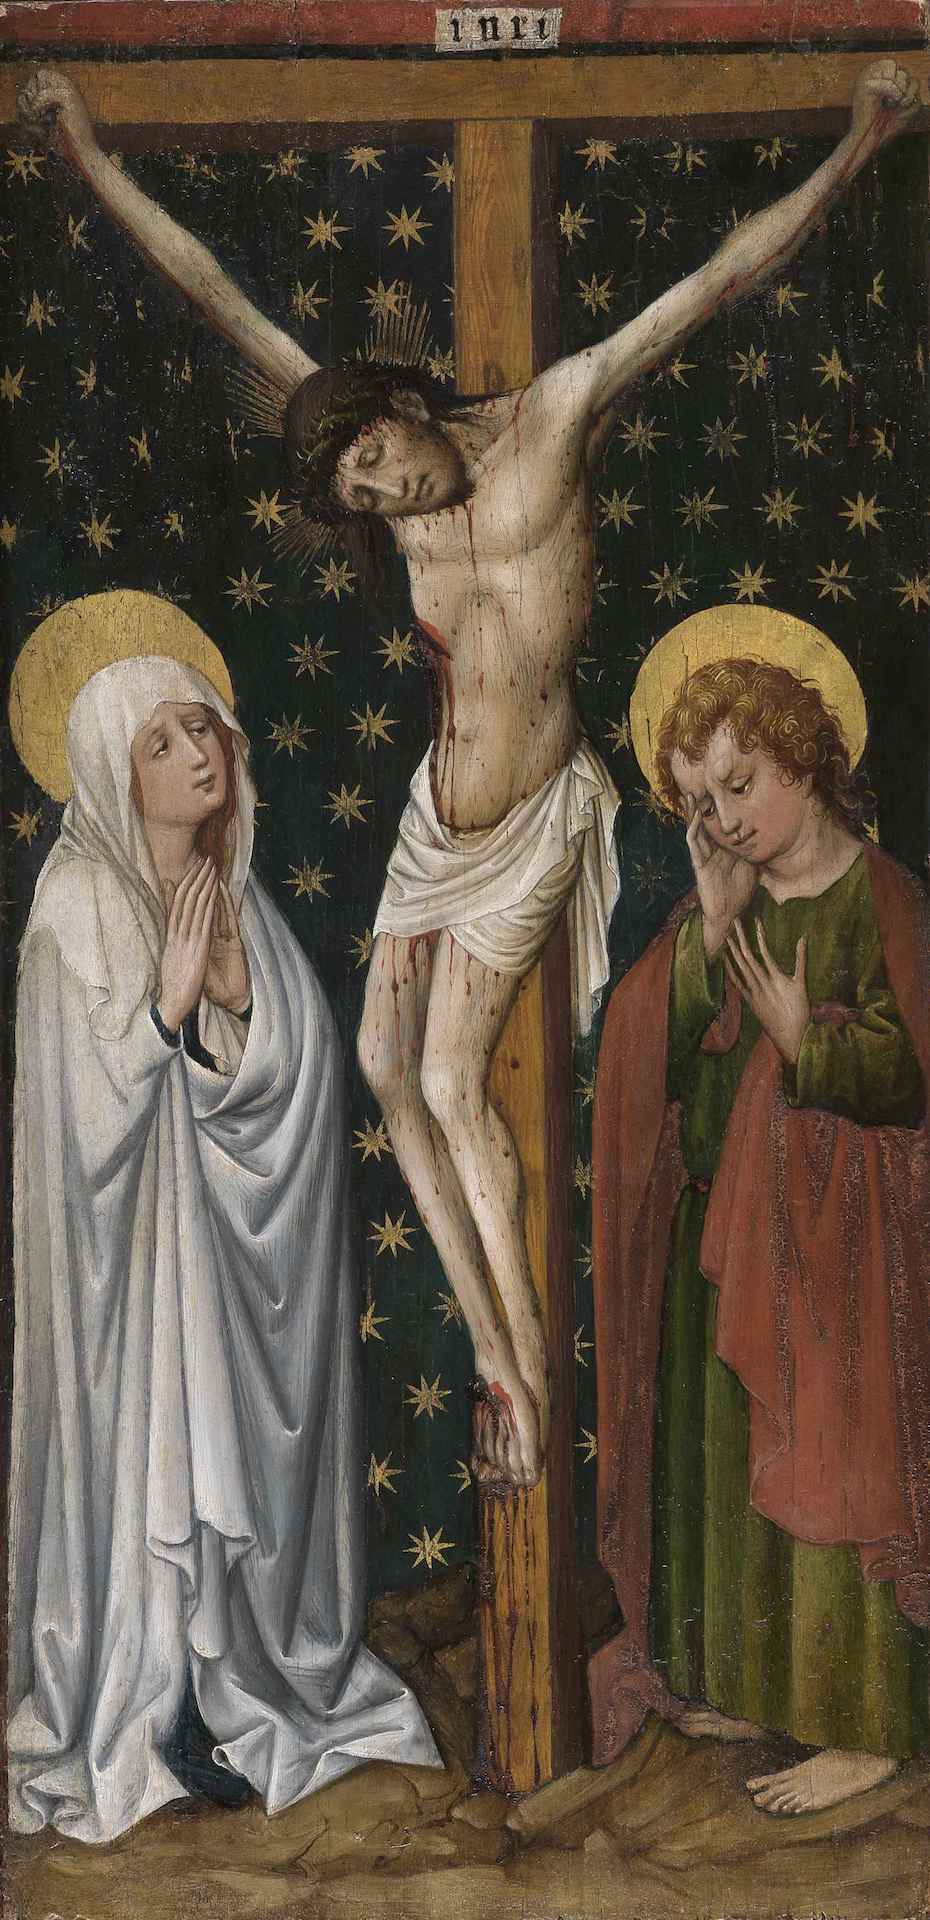 Painting by the Master of the Staufen Altarpiece showing the crucifixion scene. The crucified Jesus is flanked on the right and left by two women.